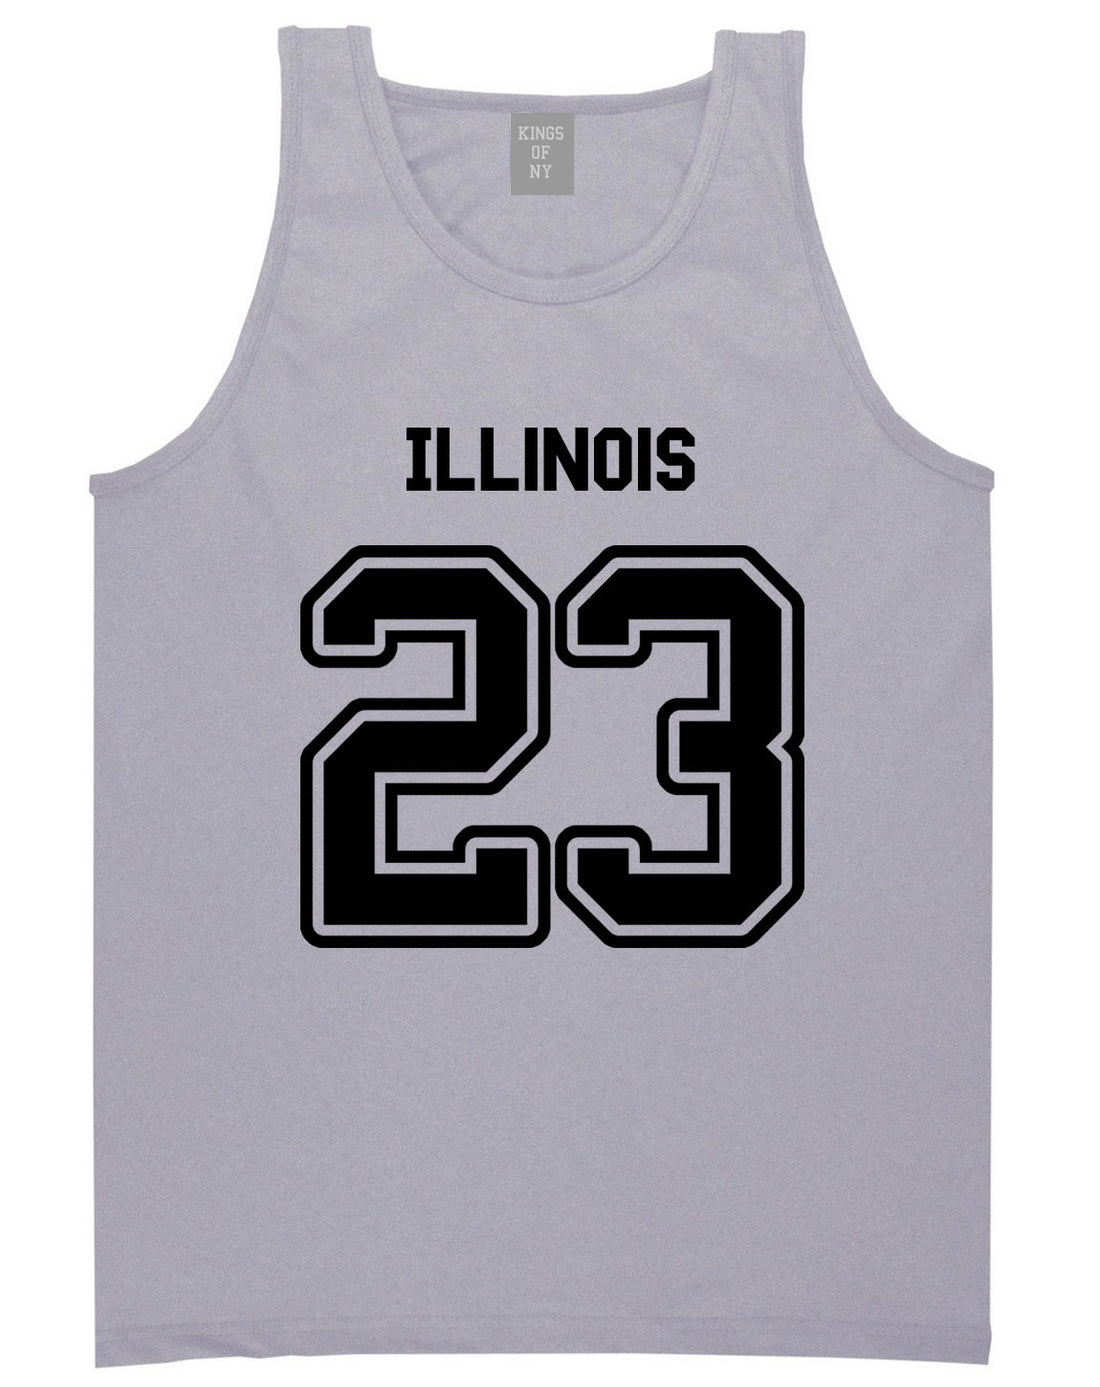 Sport Style Illinois 23 Team State Jersey Mens Tank Top By Kings Of NY